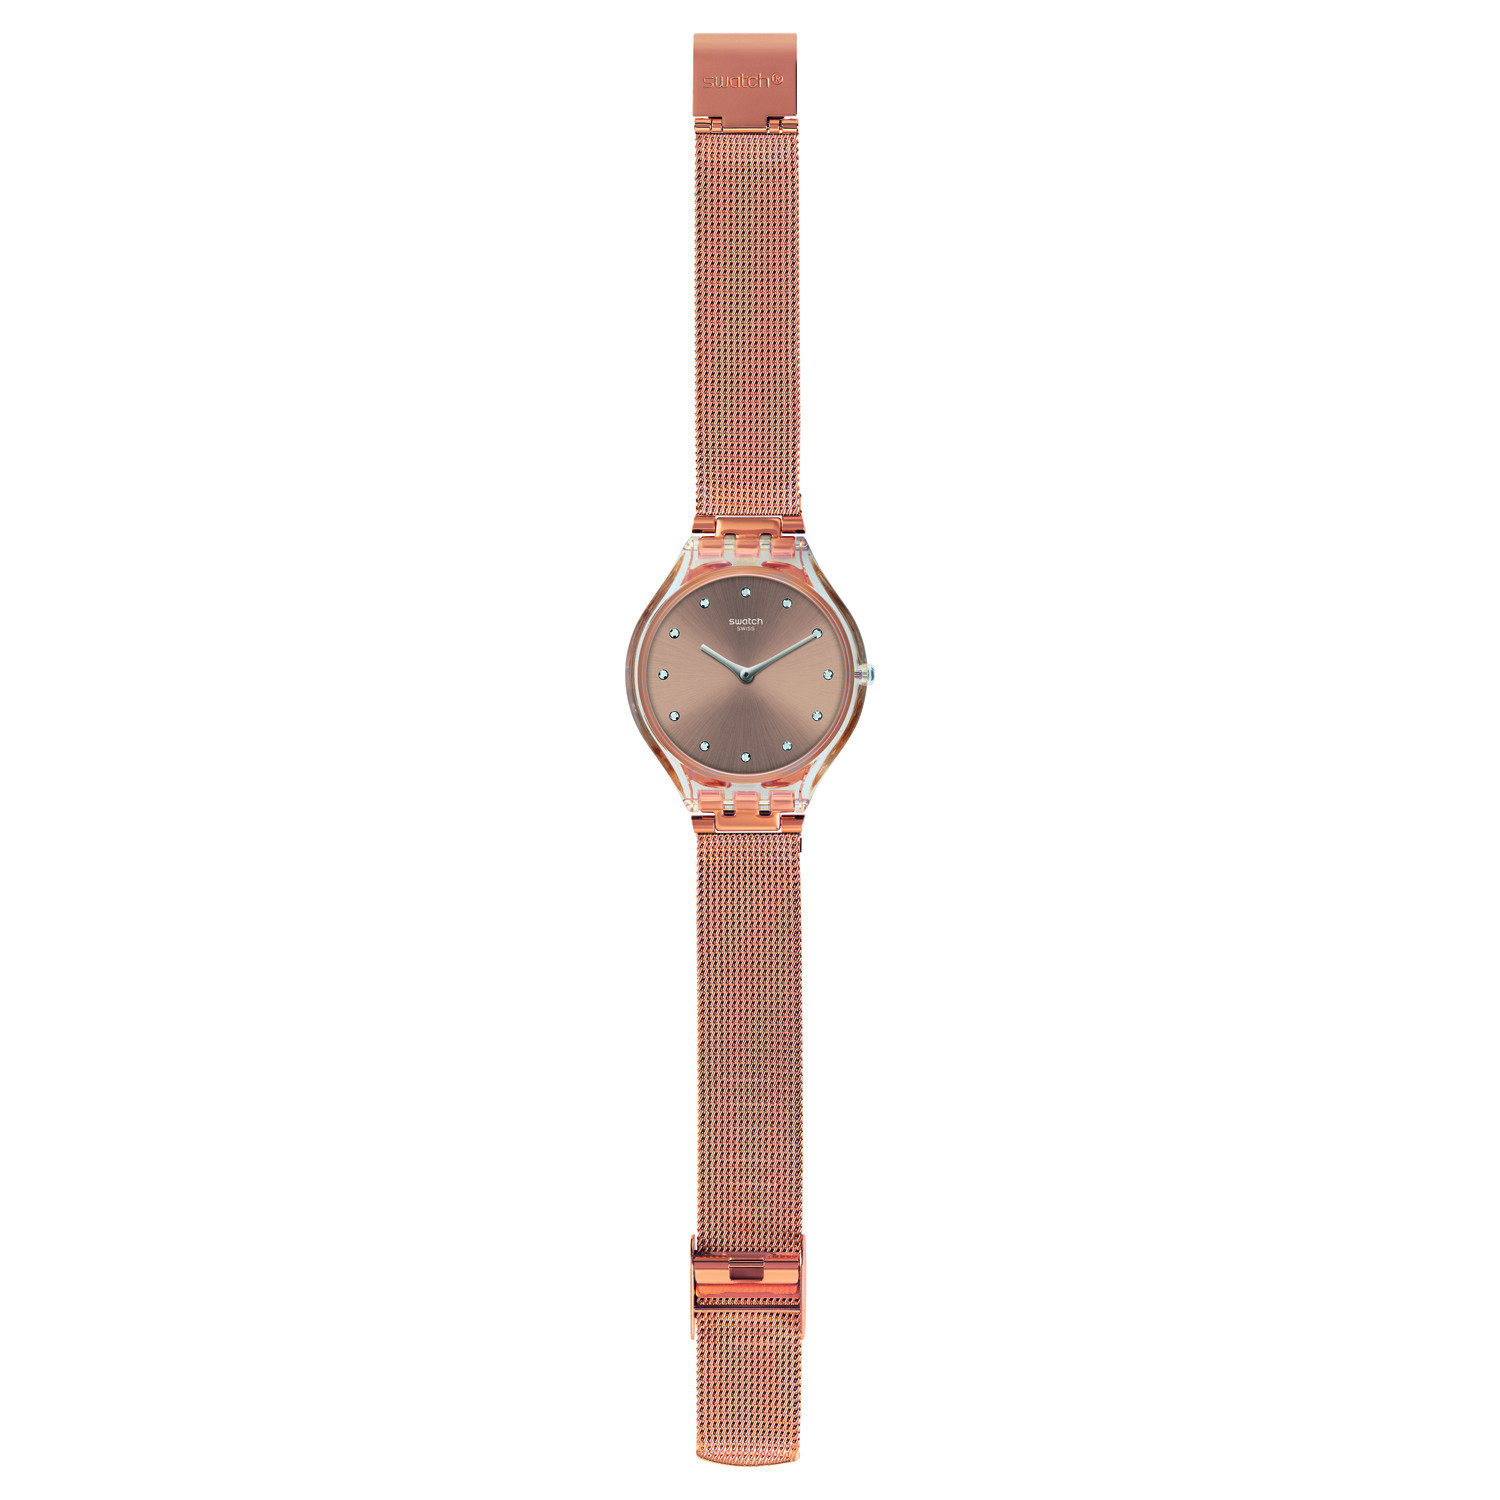 Montre femme Swatch Skindesert
collection Skin